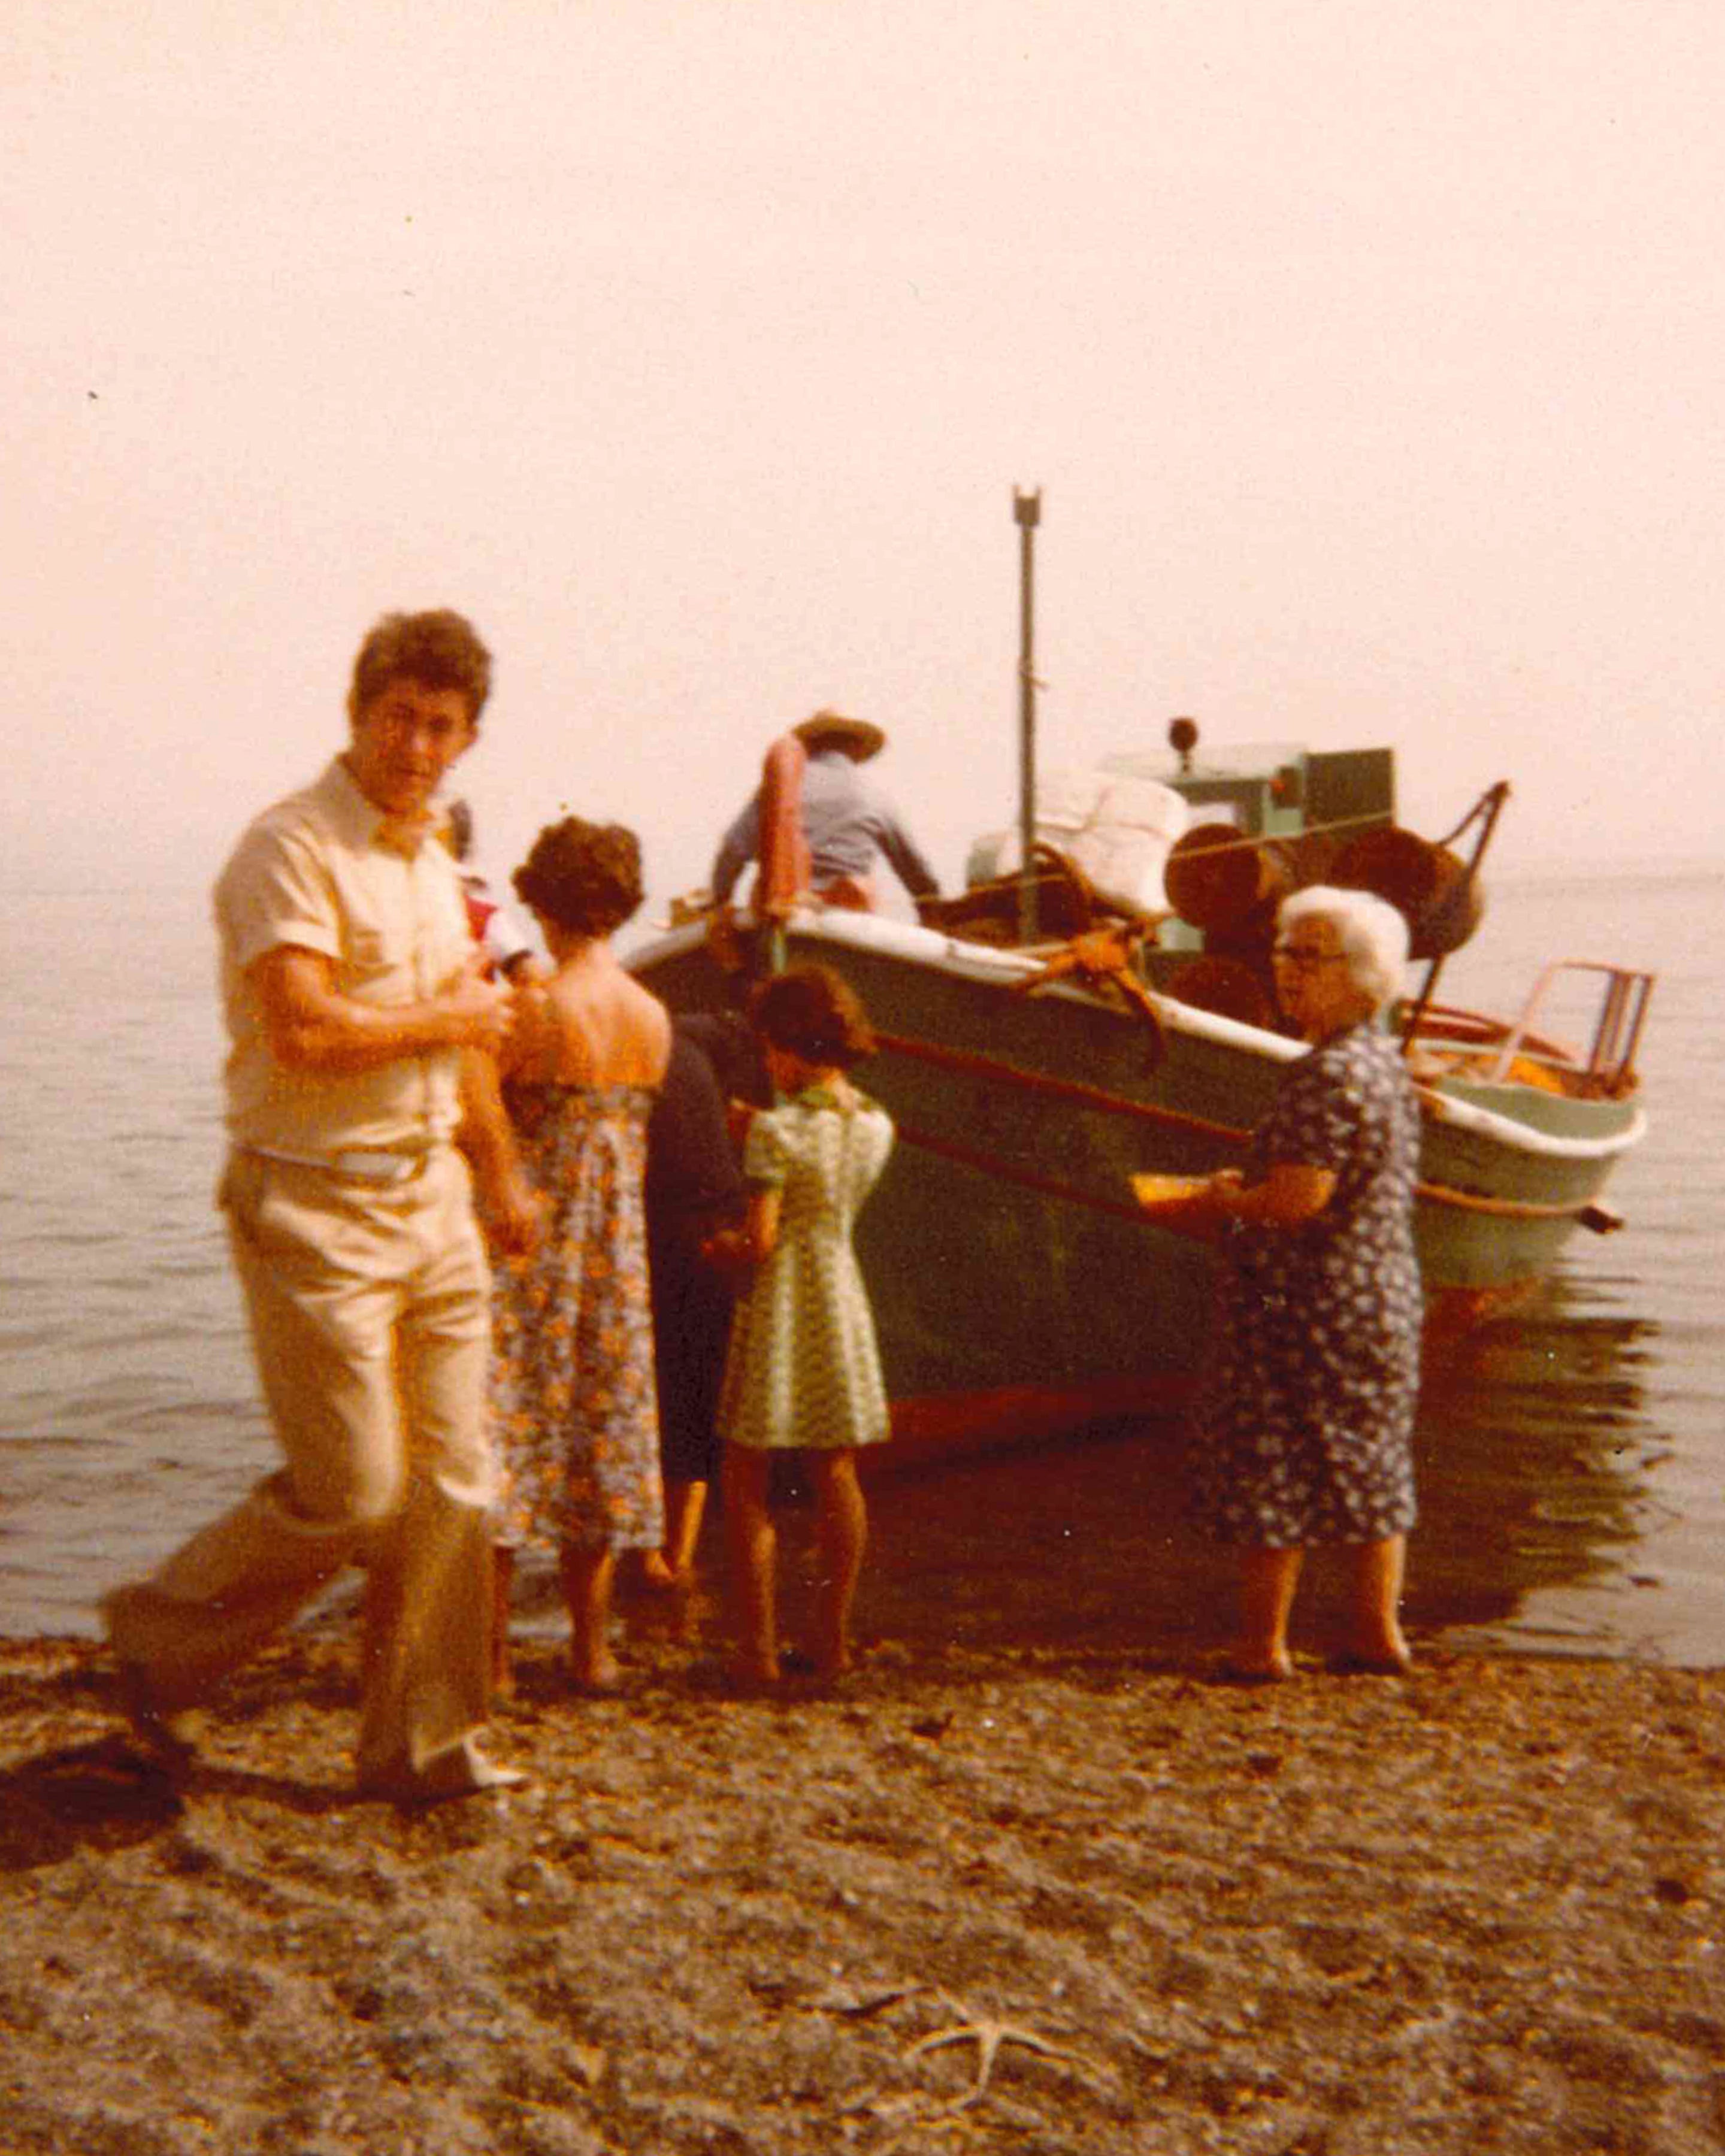 Family standing on shore in front of small boat in water